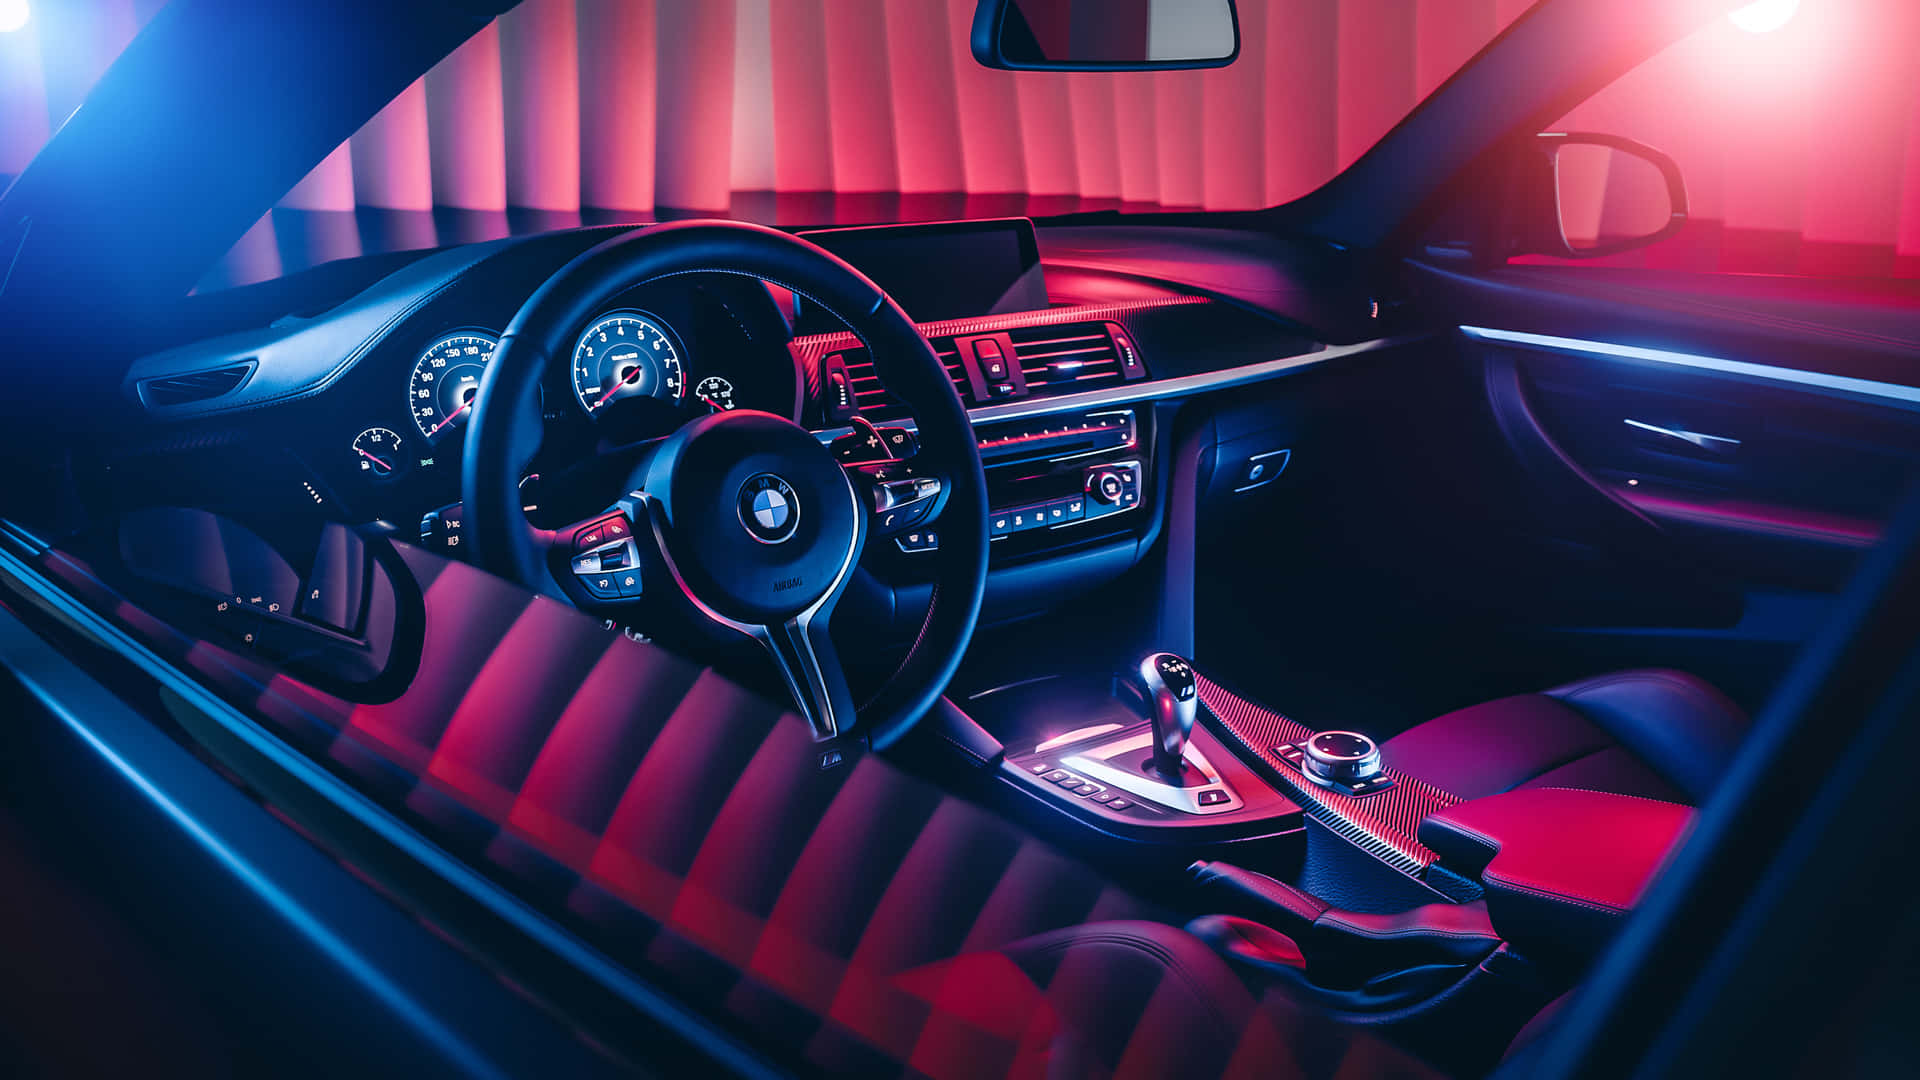 Speed, luxury and style combined in this 4k BMW